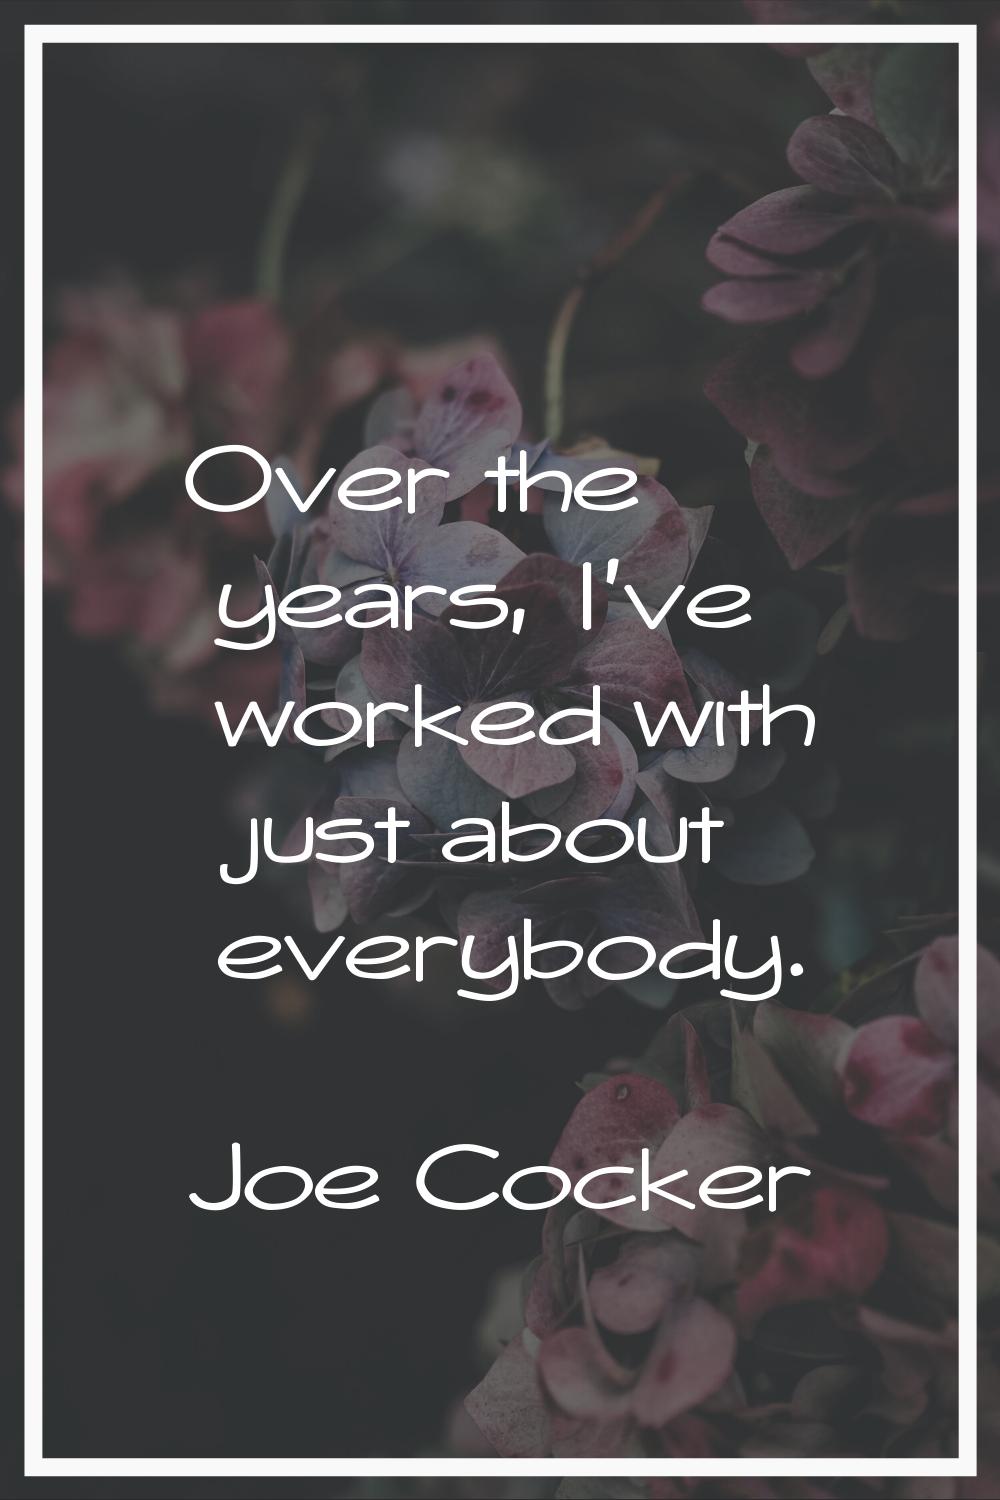 Over the years, I've worked with just about everybody.